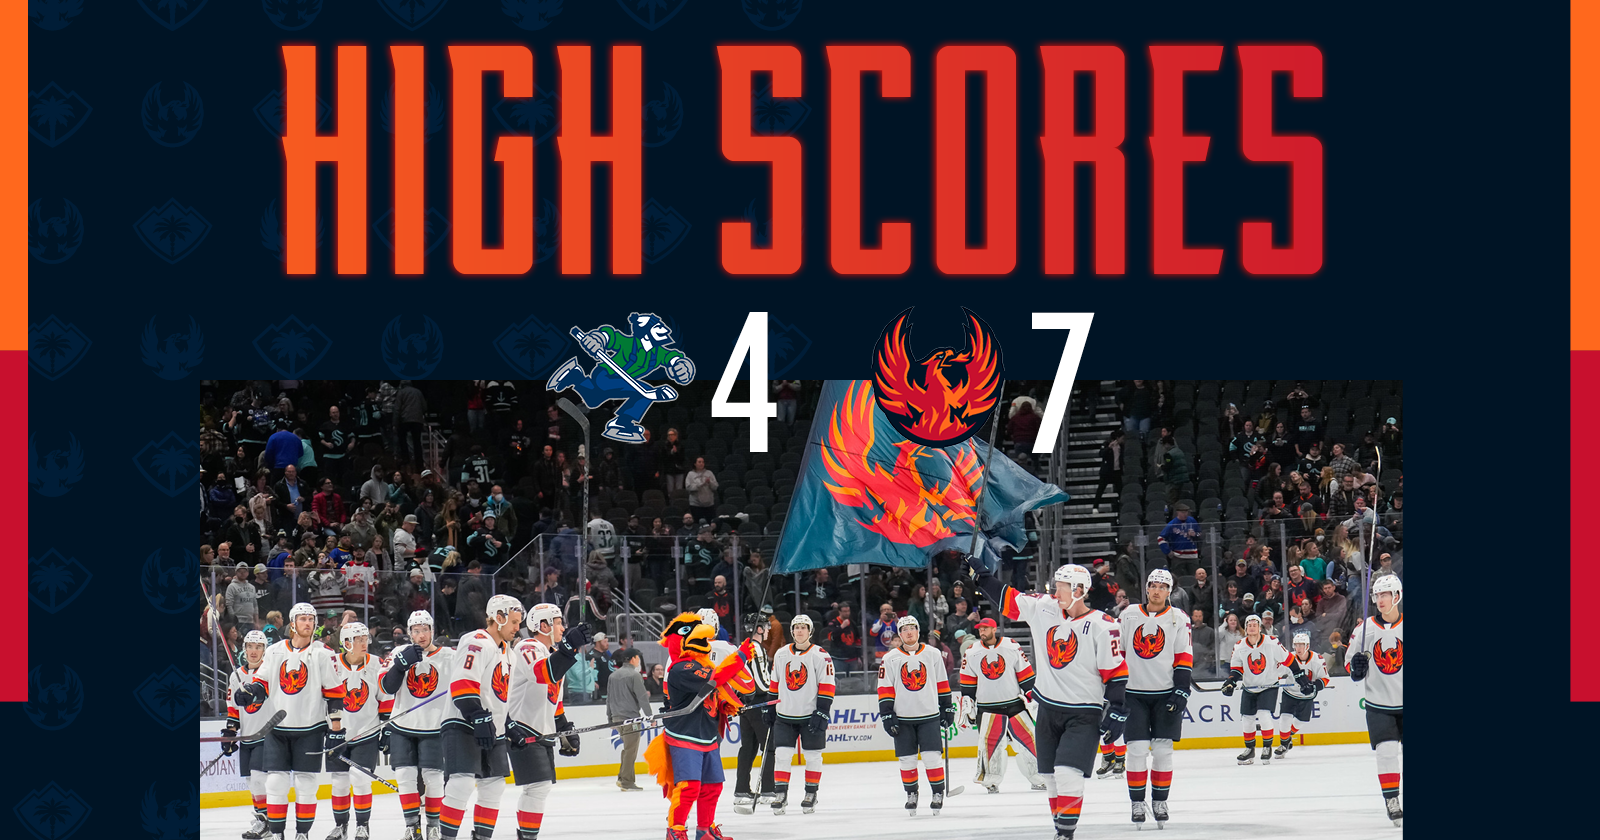 ABBOTSFORD CANUCKS HOLD OFF FIREBIRDS IN 5-2 VICTORY